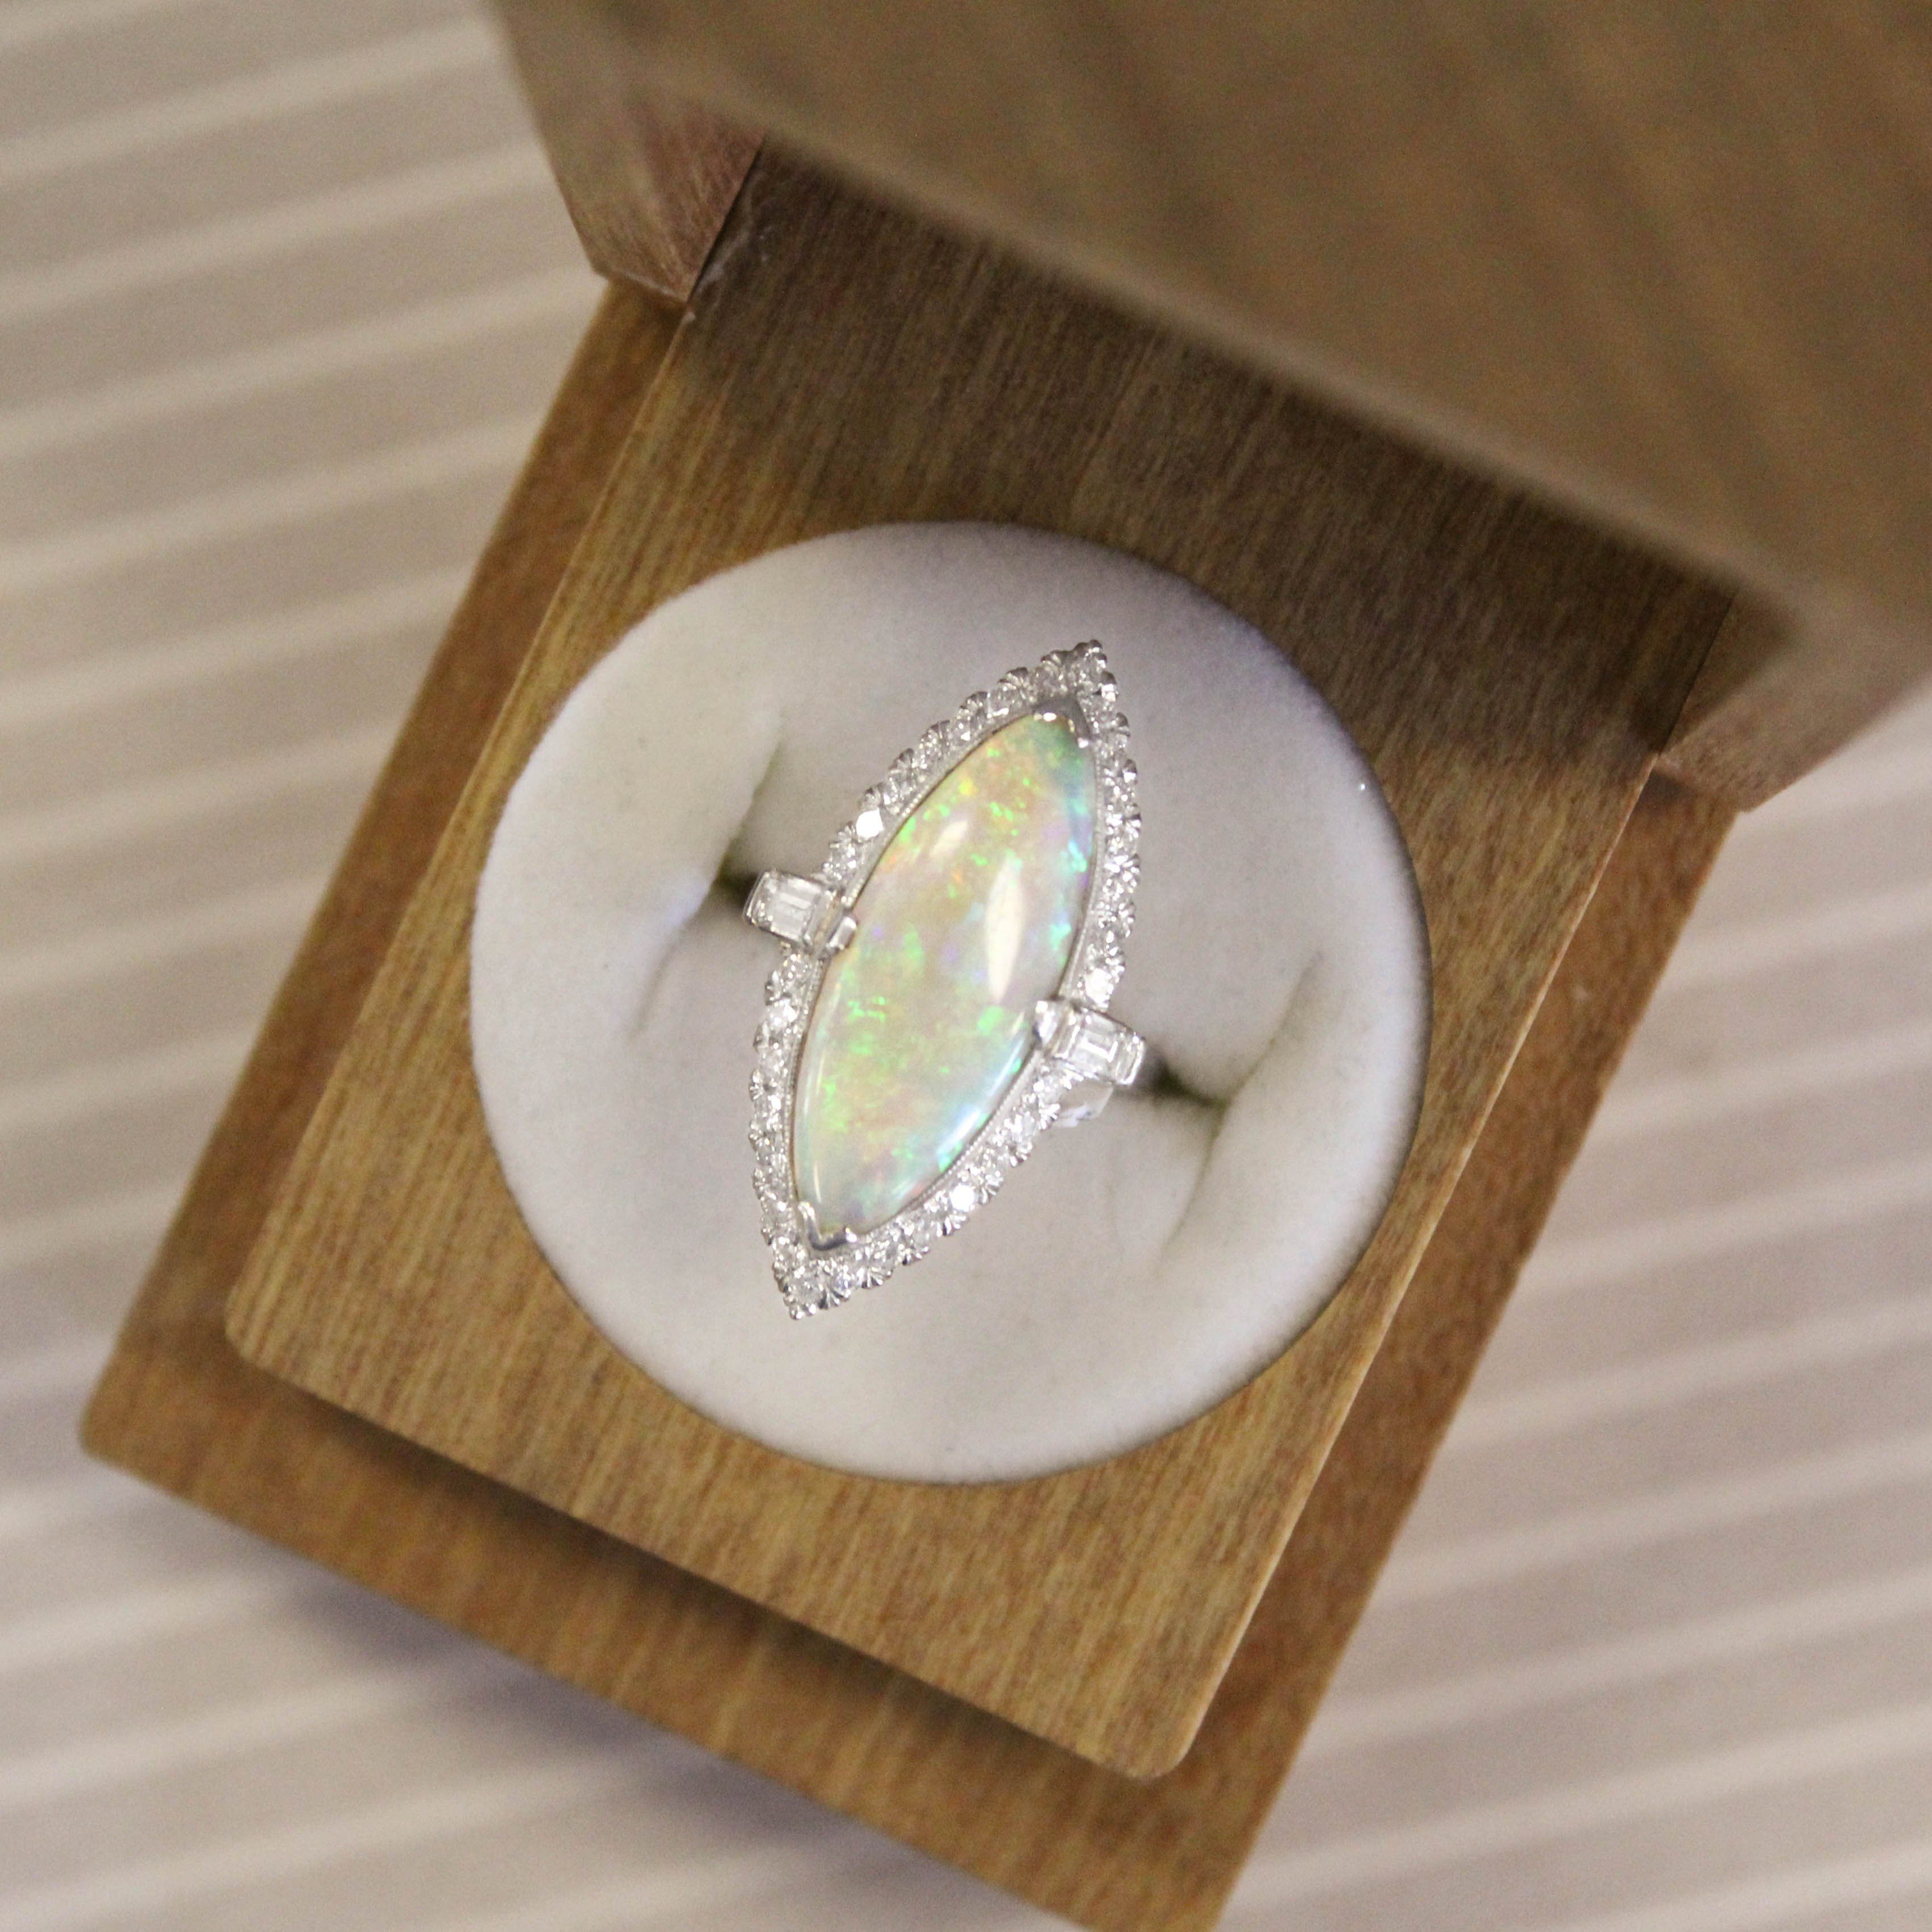 8 Stunning Vintage Opal Rings | Brilliant Earth With Regard To Most Up To Date Vintage Circle Rings (View 24 of 25)